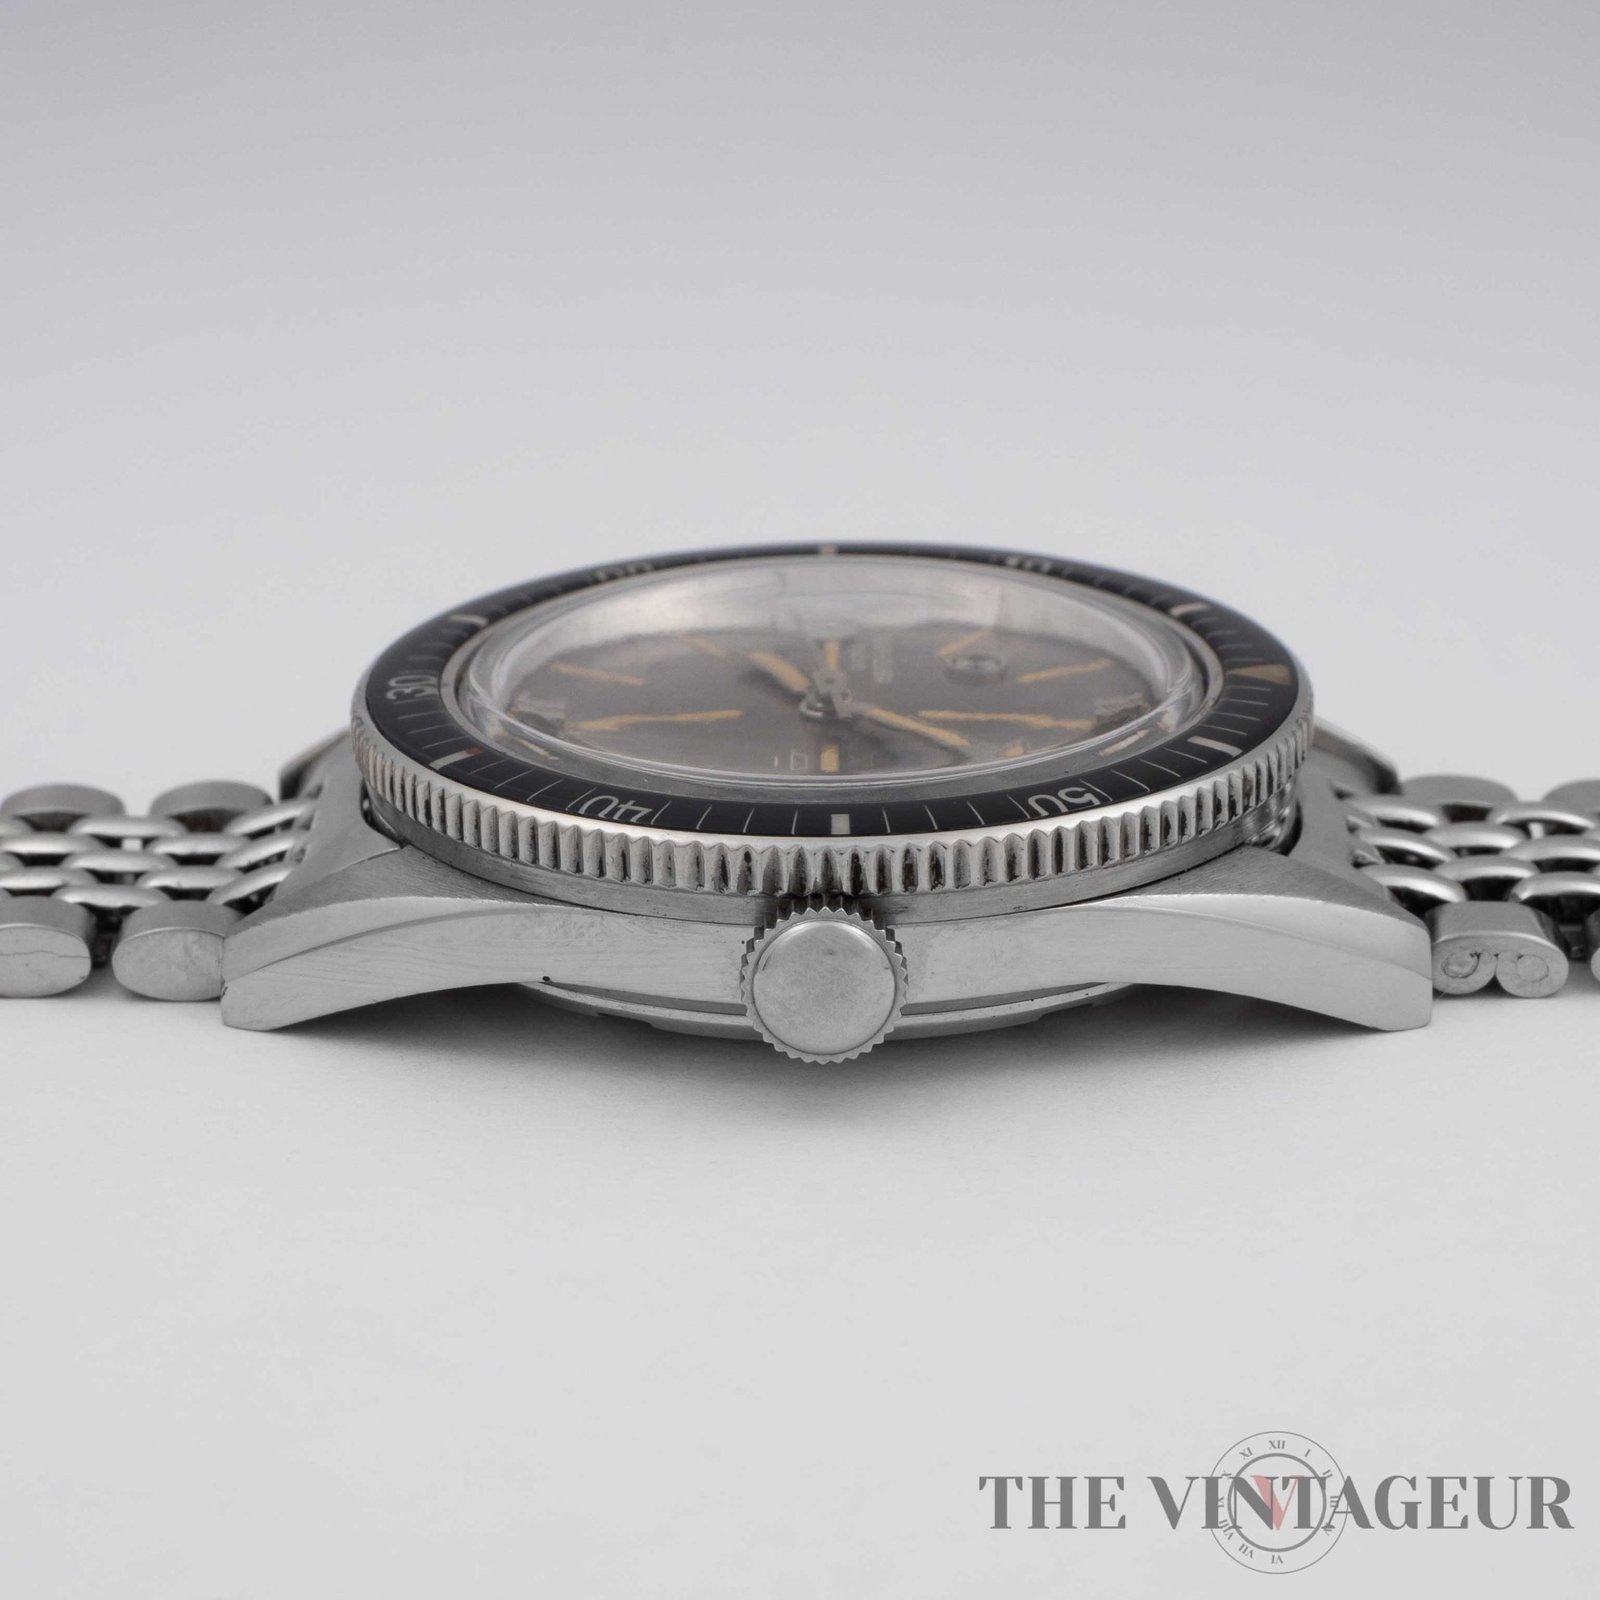 Favre Leuba - Deep Blue - The Vintageur - Your bespoke watches collection - Collectible watch and watches and more